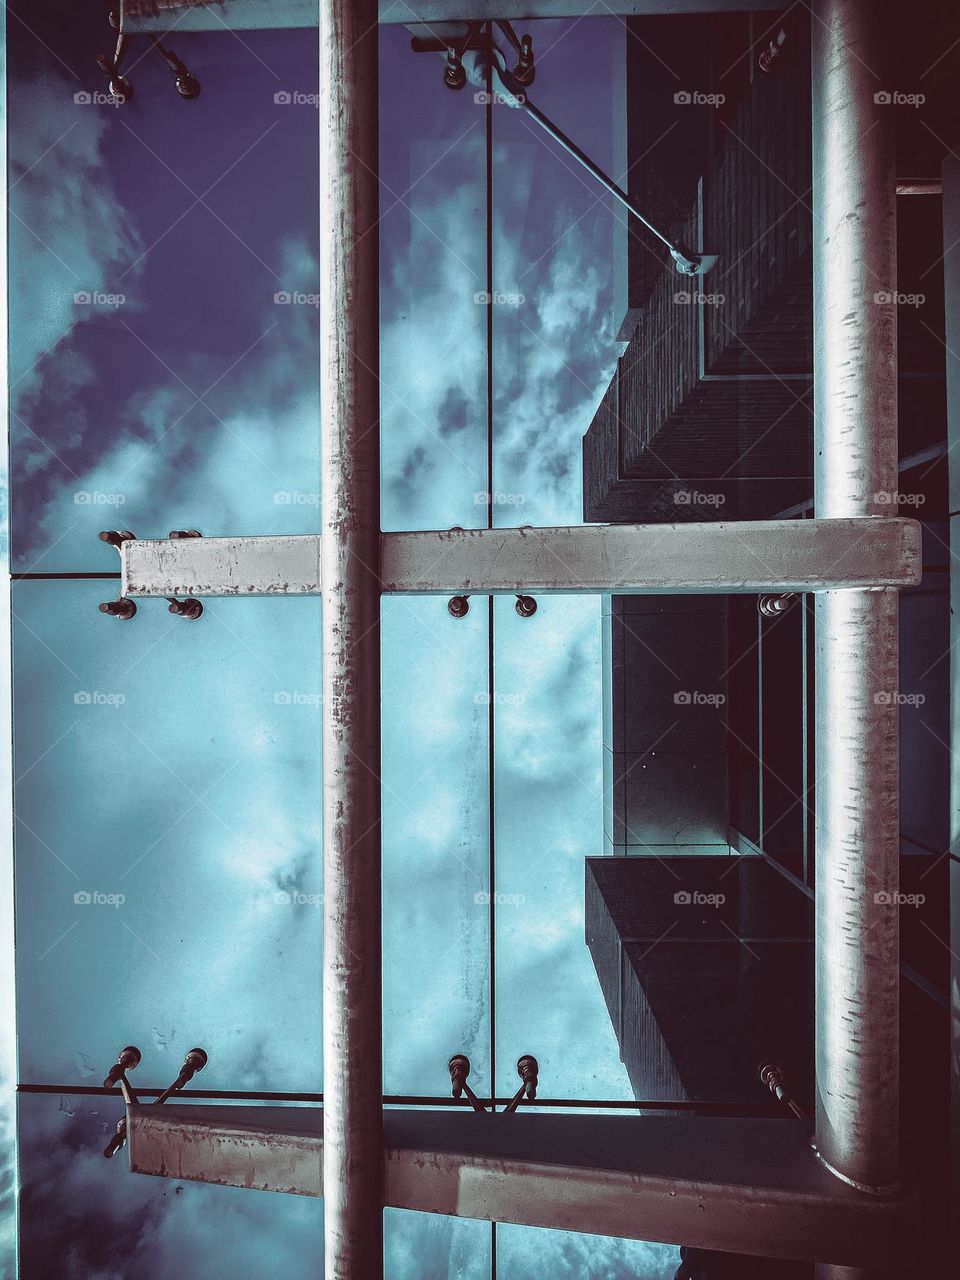 No people edited tone mood exterior building tinted  glass roof metal poles pipes steel lines shapes architecture architect engineer sky clouds upwards view looking up above design framework outside cool vibes phone photo photography amateur